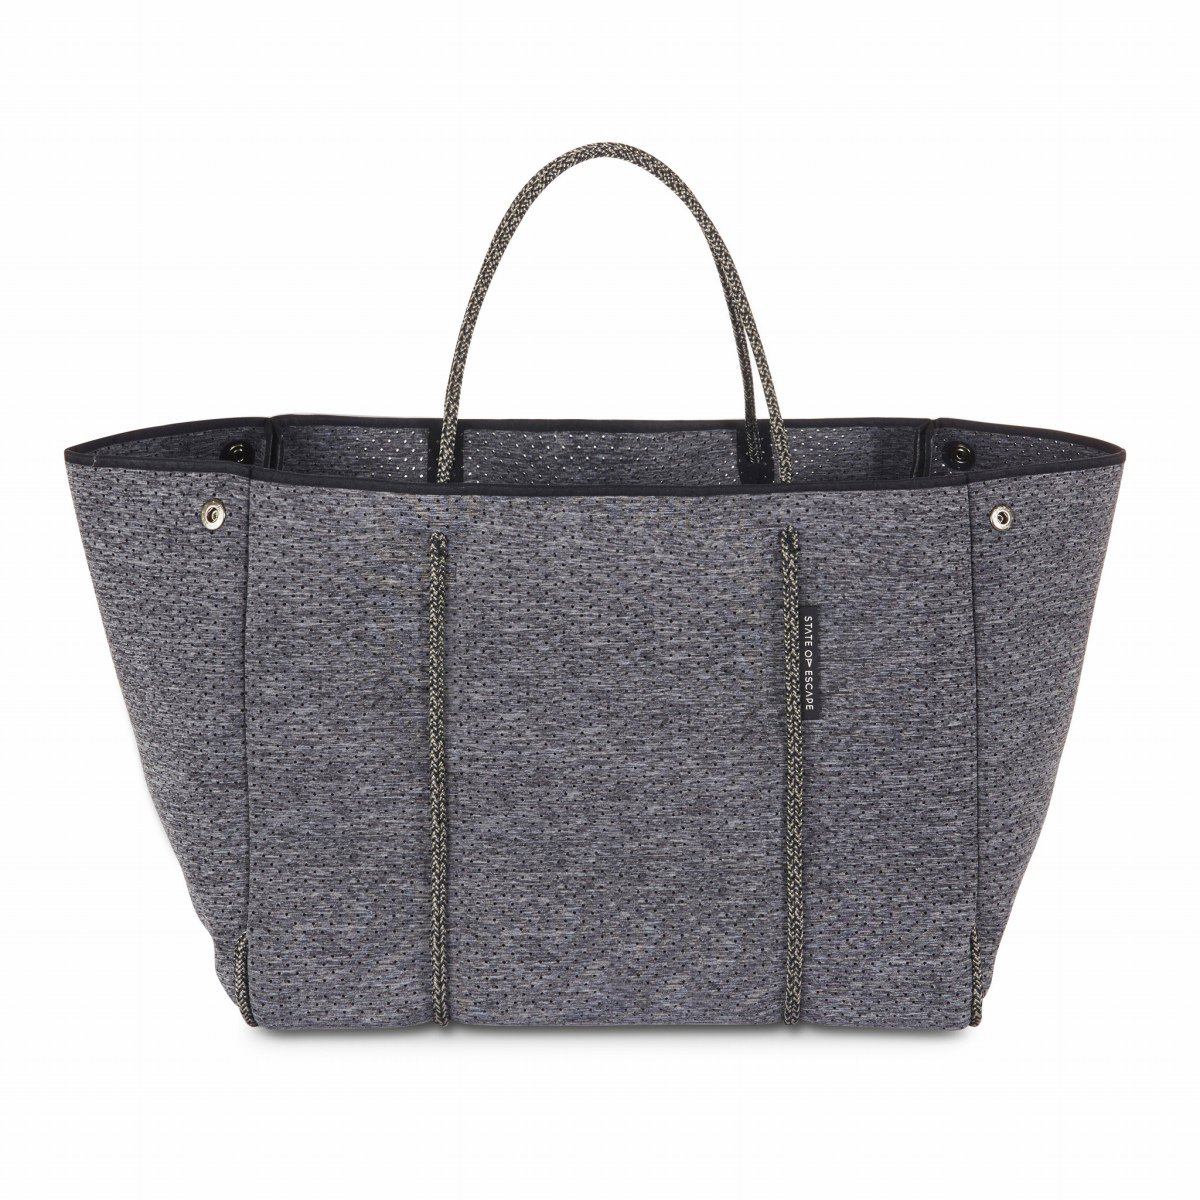 State of Escape(ステイトオブエスケープ)ESCAPE bag in LUXE charcoal ...